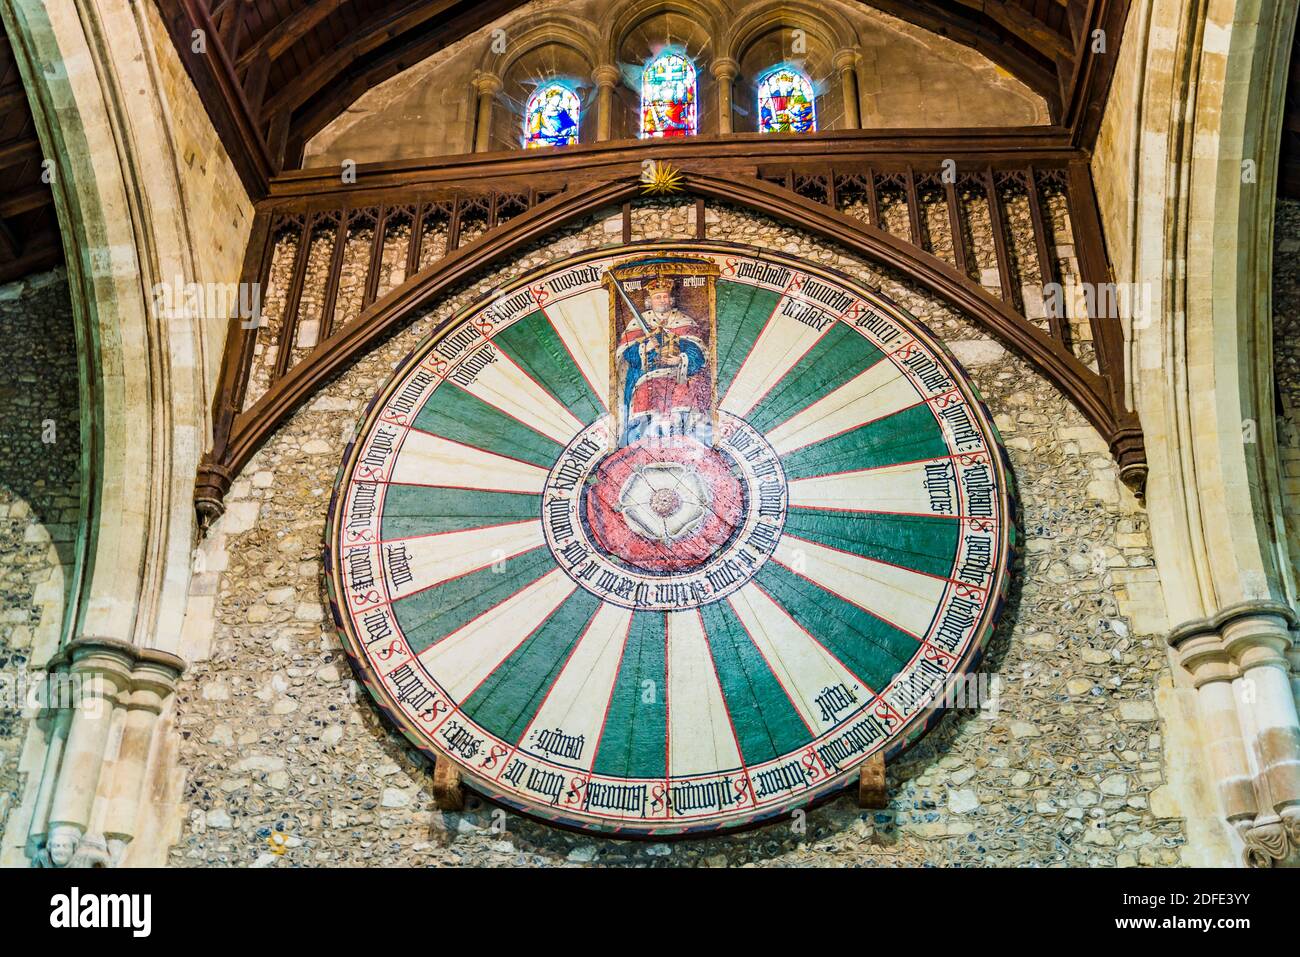 Winchester Round Table in the Great Hall, a medieval replica of King Arthur's legendary table. Winchester, Hampshire, England, United Kingdom, Europe Stock Photo